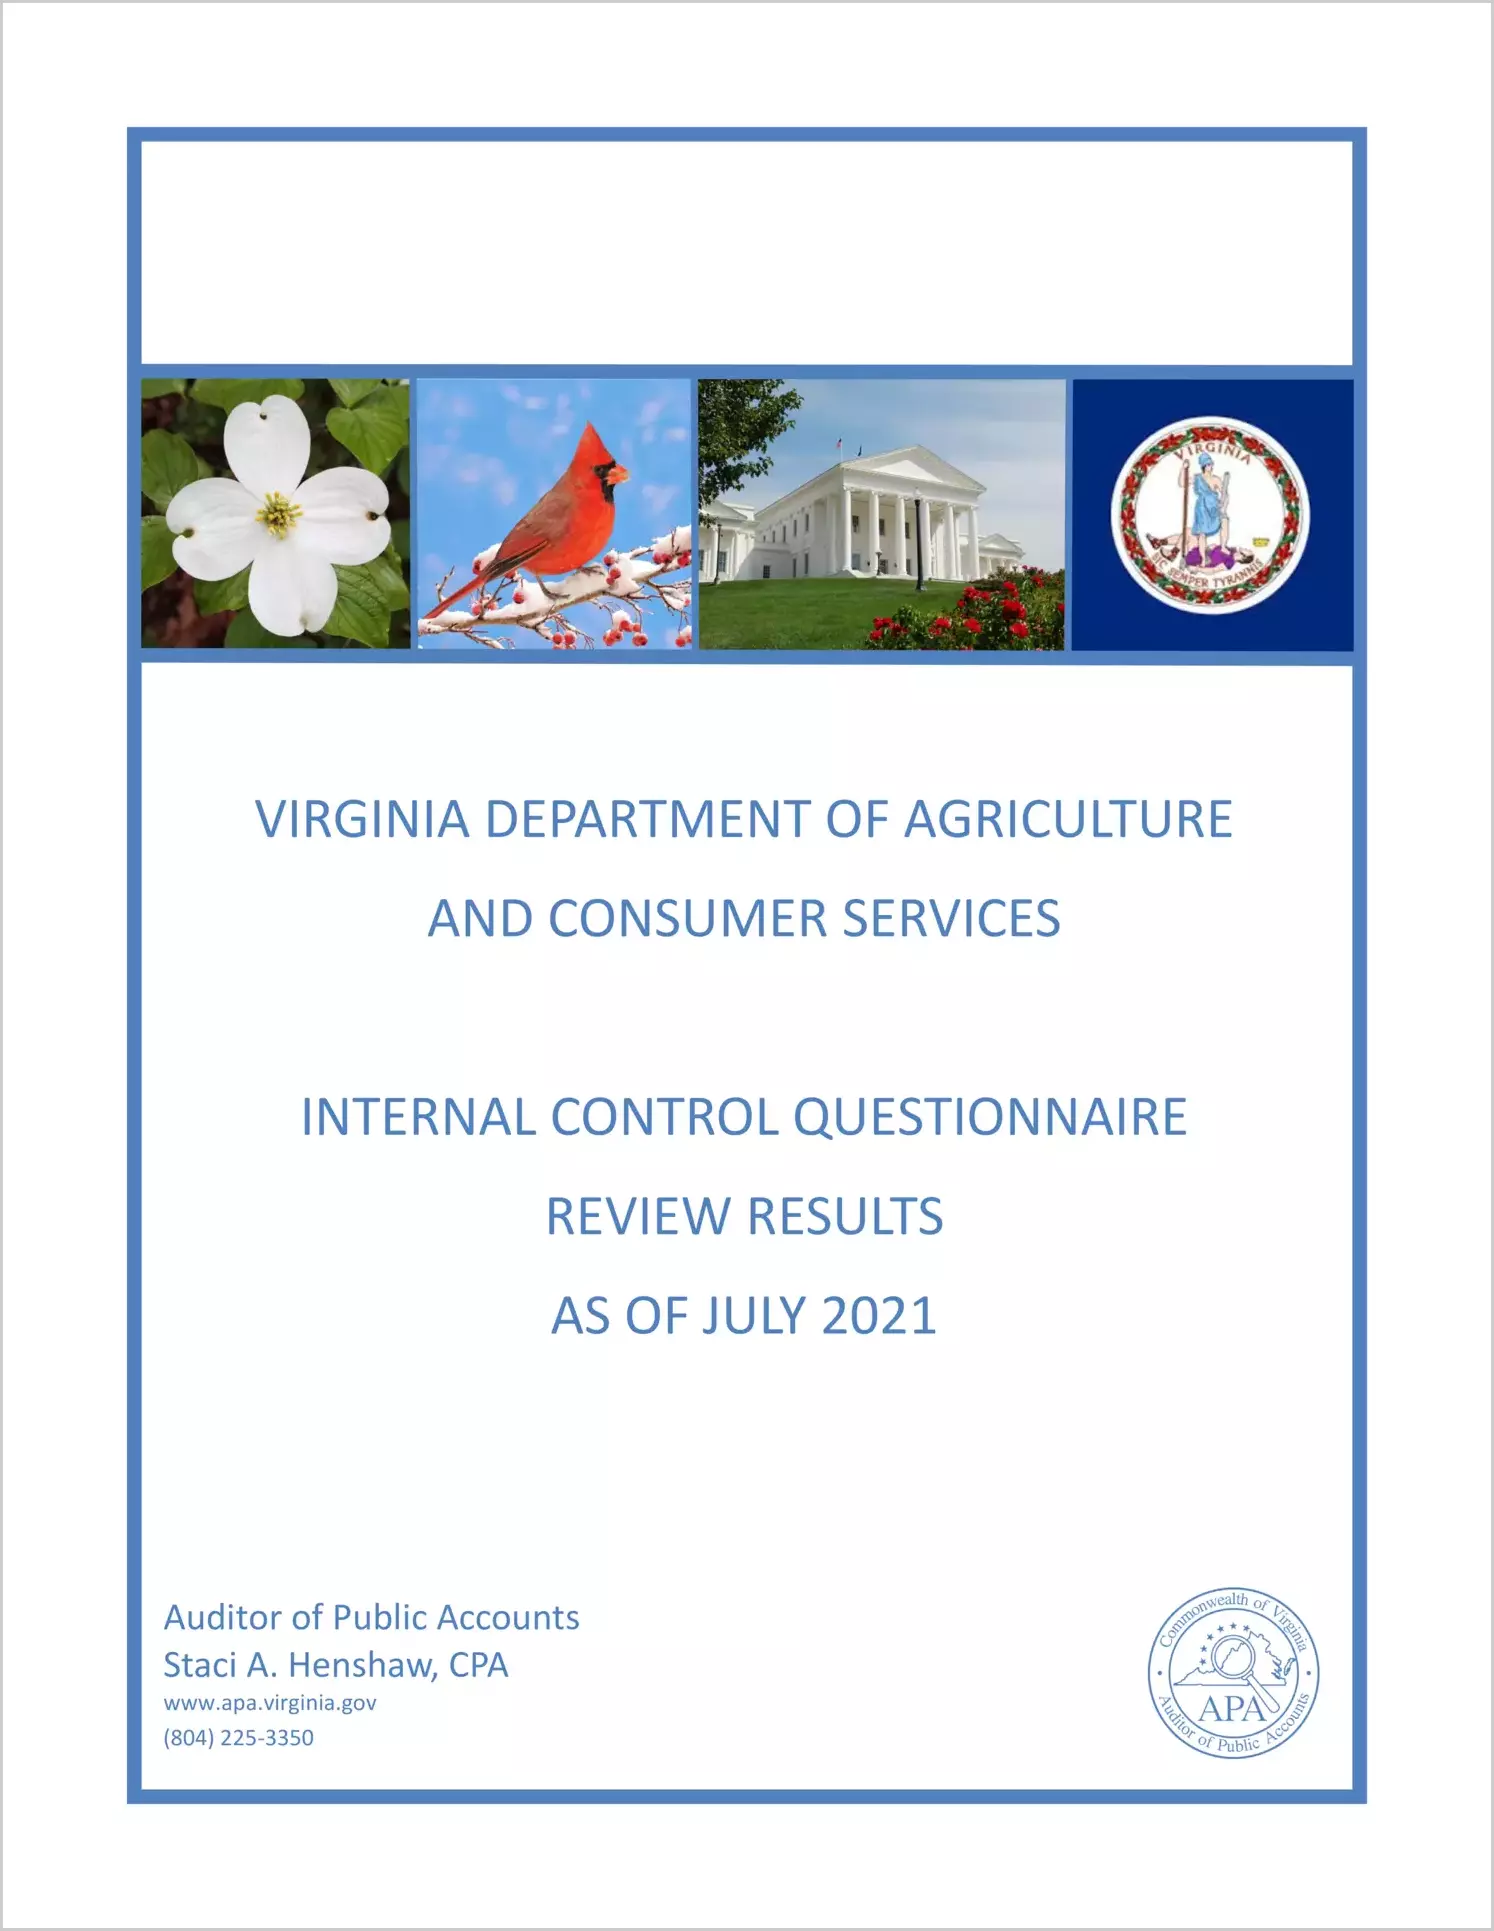 Virginia Department of Agriculture and Consumer Services Internal Control Questionnaire Review Results as of July 2021